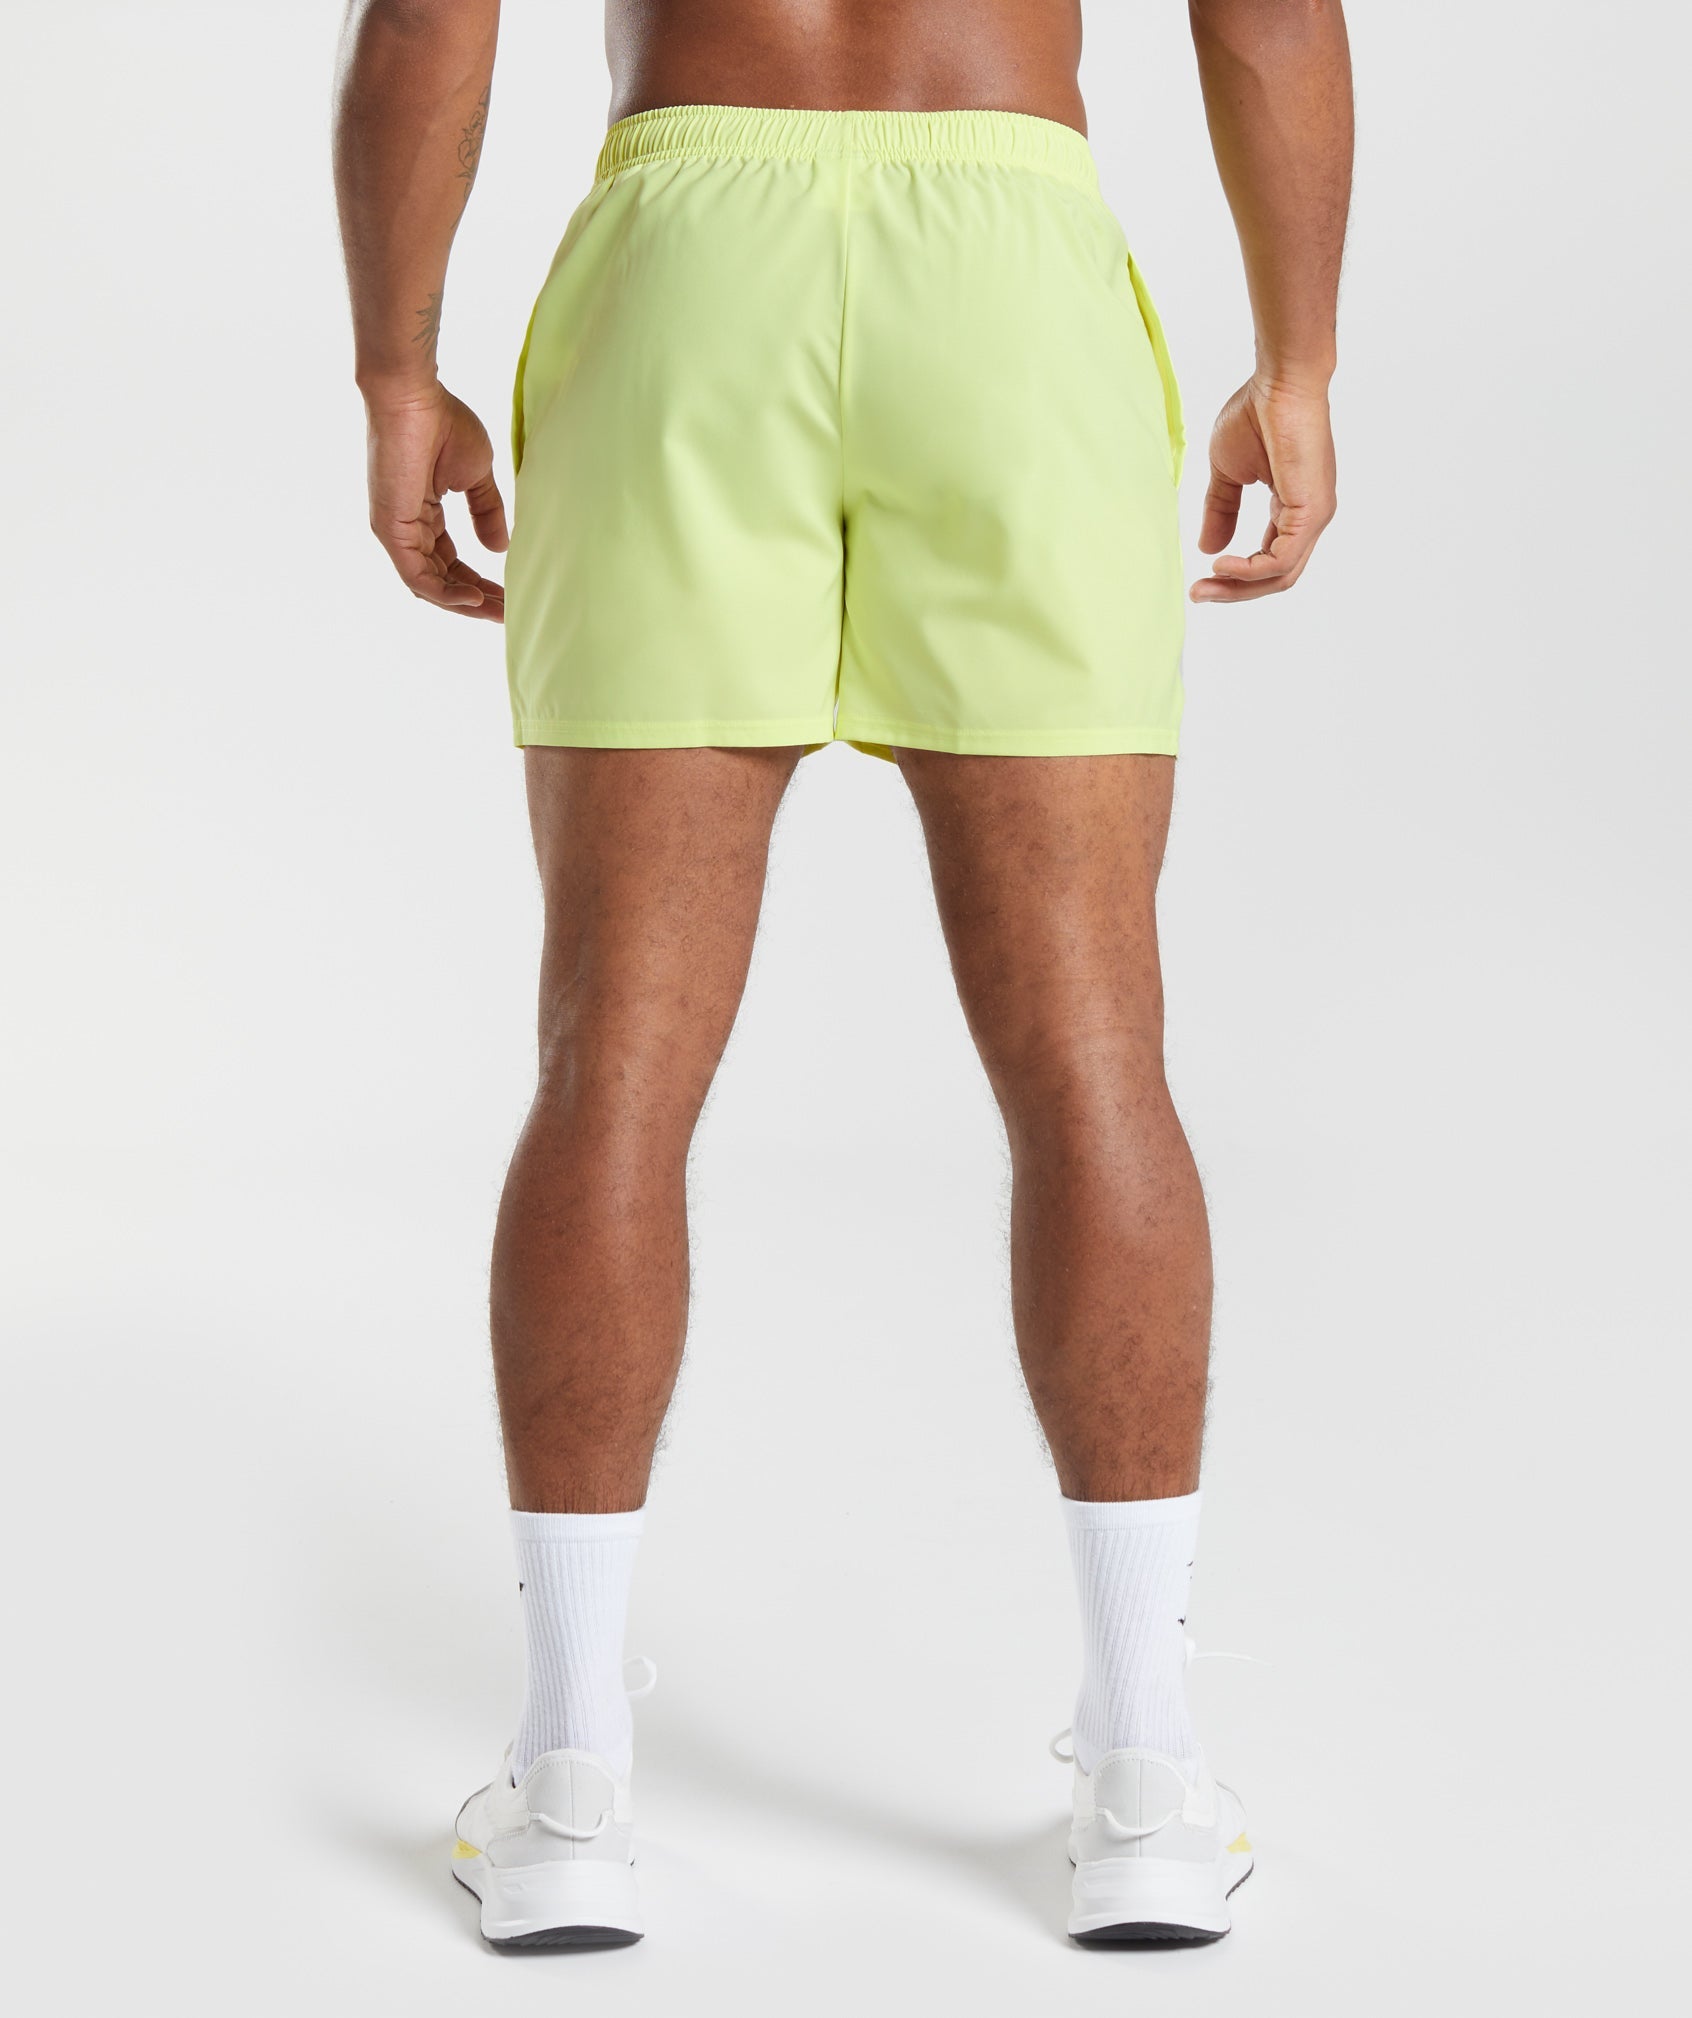 Arrival 5" Shorts in Firefly Green